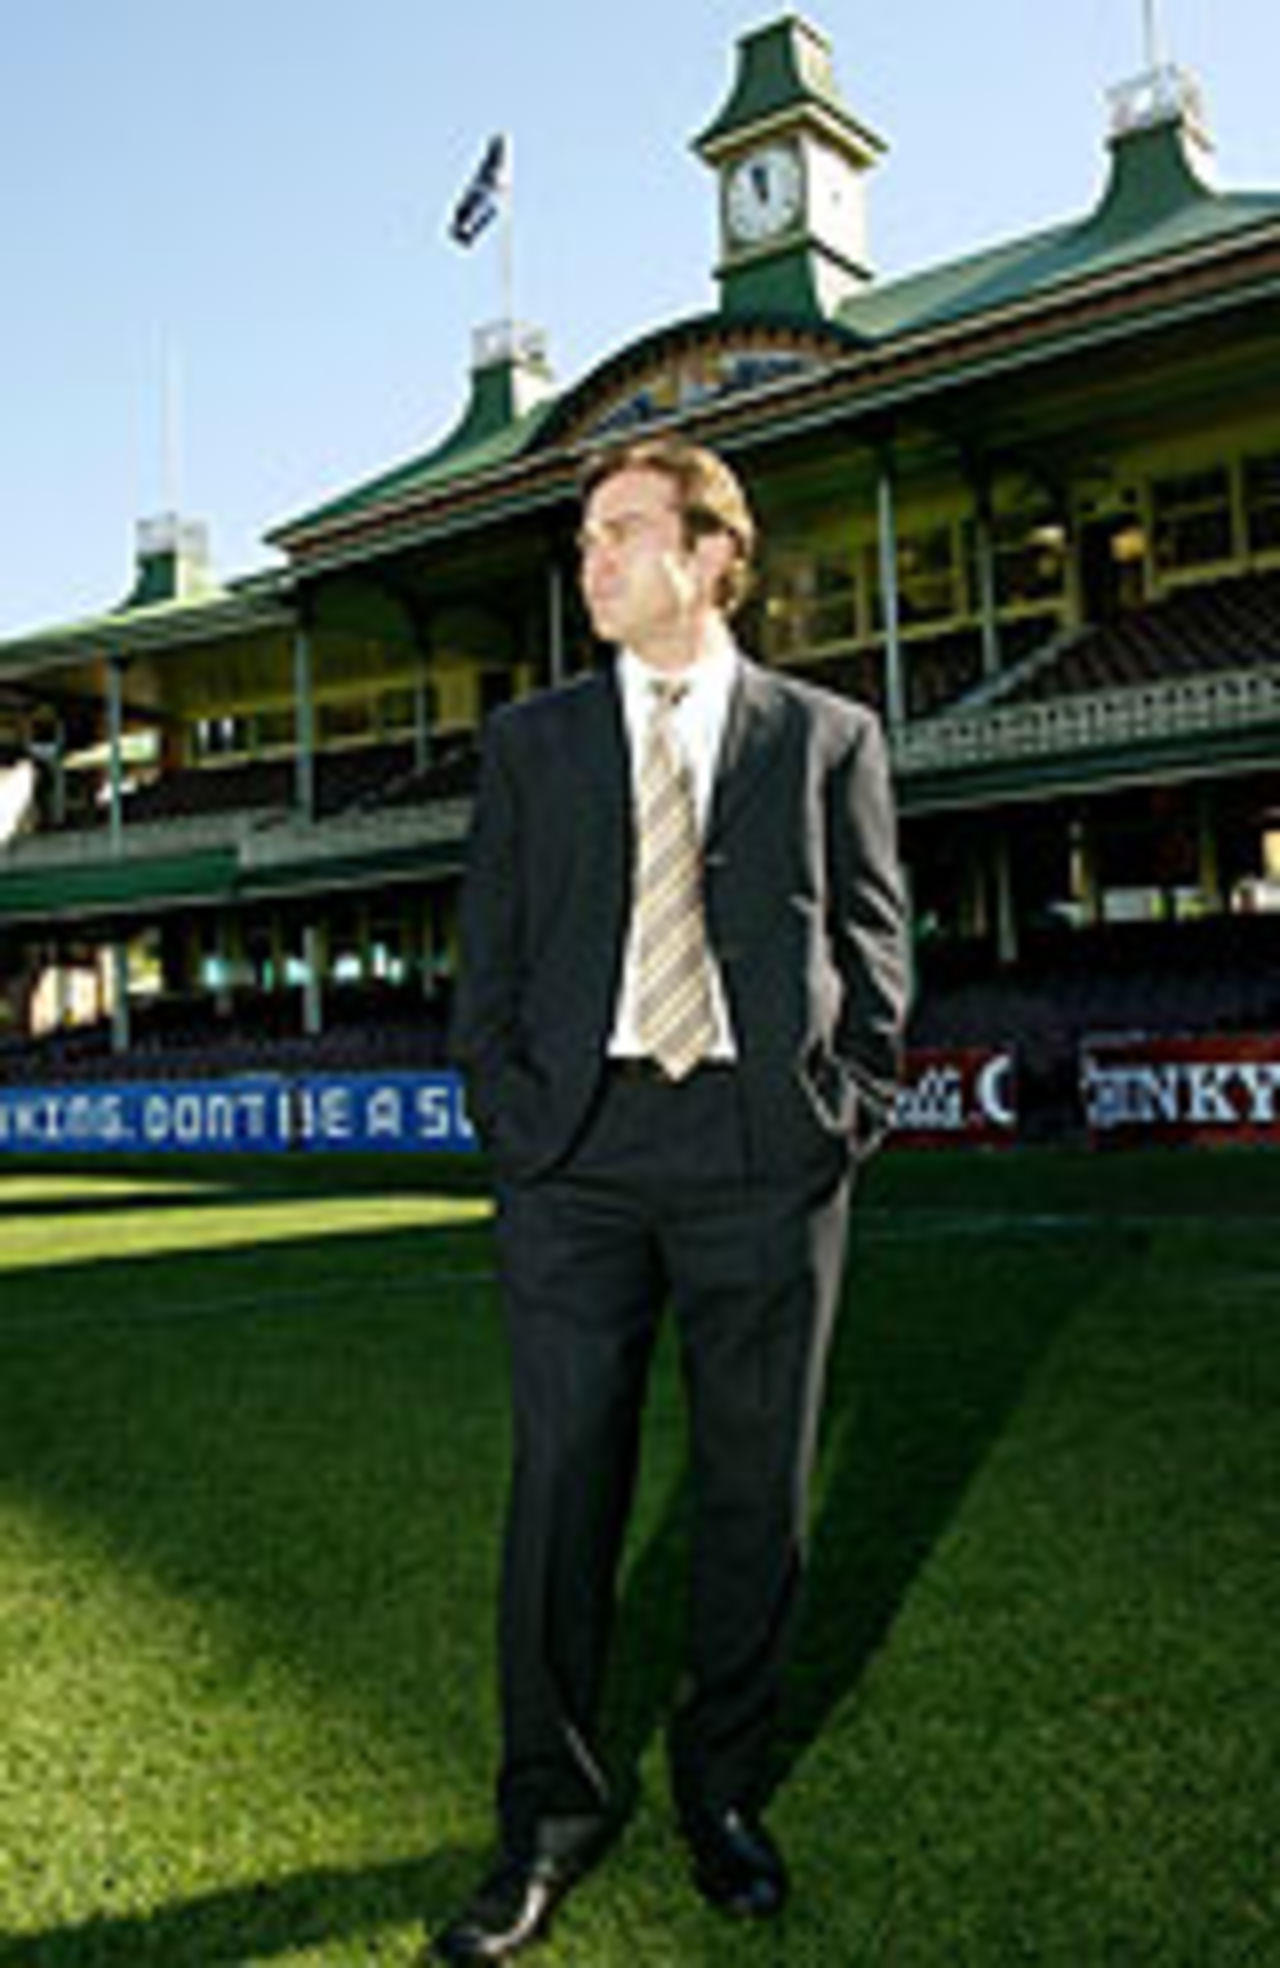 Michael Slater having a look around the SCG after retiring, June 9 2004